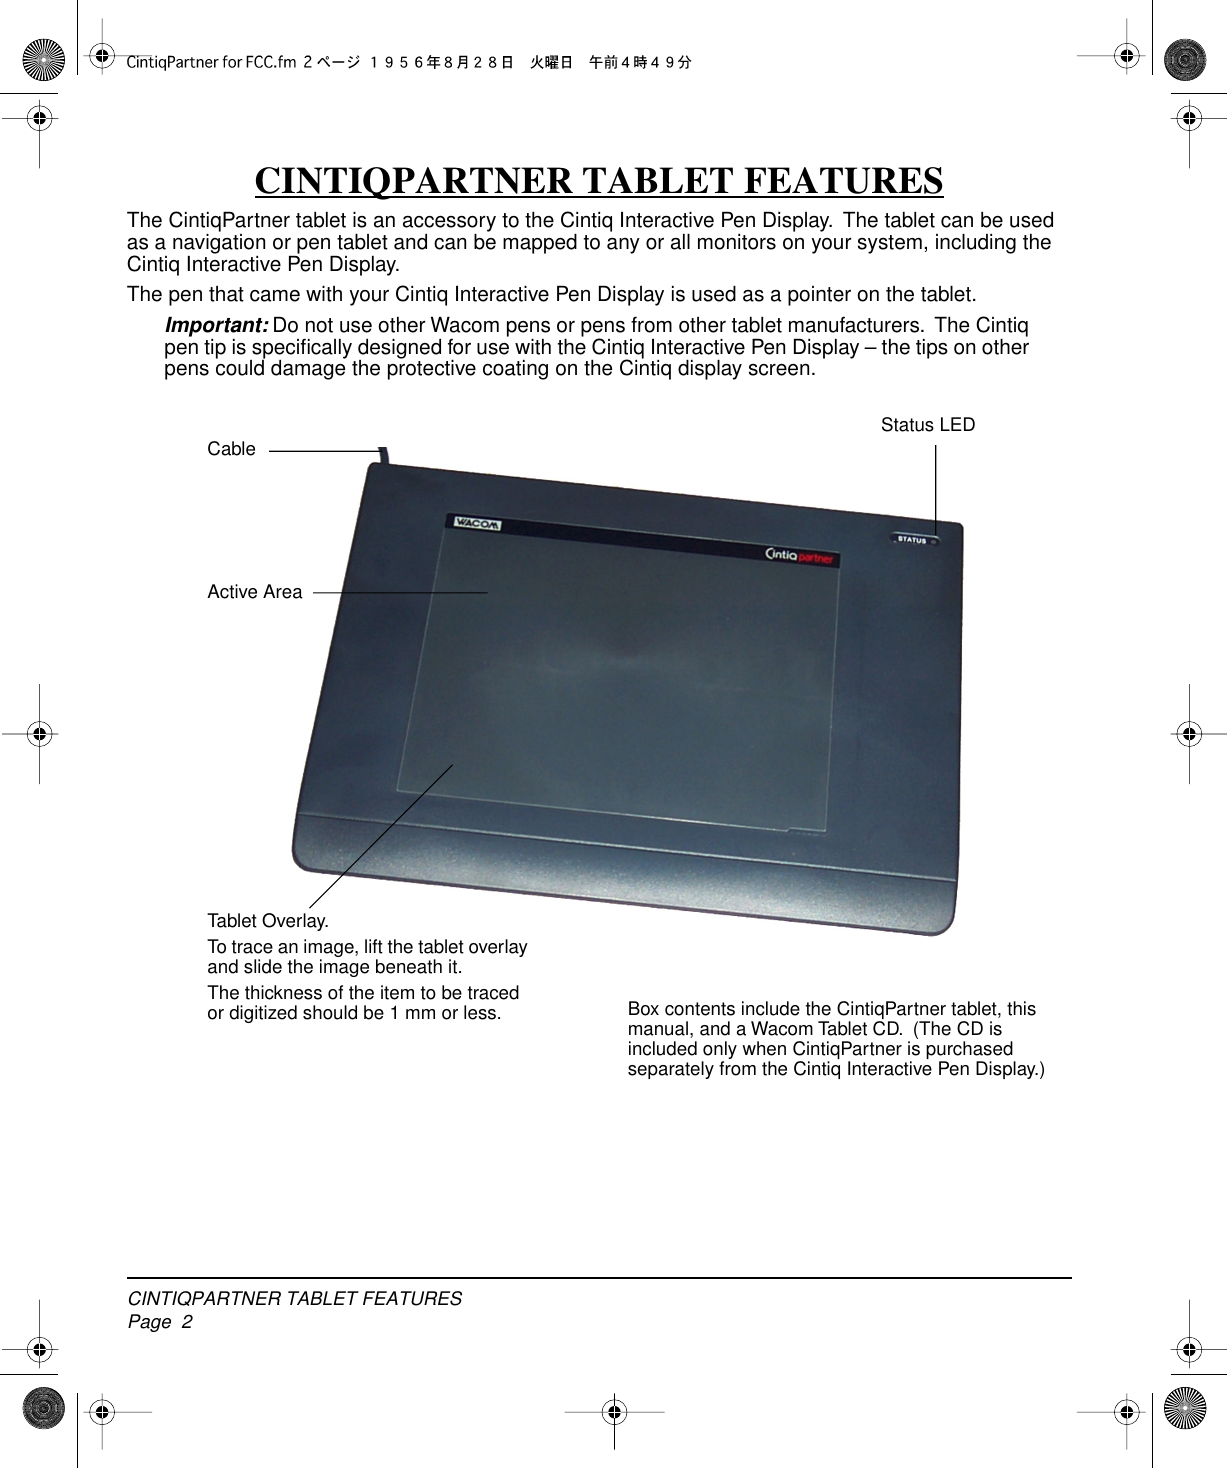  CINTIQPARTNER TABLET FEATURESPage  2 CINTIQPARTNER TABLET FEATURES The CintiqPartner tablet is an accessory to the Cintiq Interactive Pen Display.  The tablet can be used as a navigation or pen tablet and can be mapped to any or all monitors on your system, including the Cintiq Interactive Pen Display.The pen that came with your Cintiq Interactive Pen Display is used as a pointer on the tablet. Important:  Do not use other Wacom pens or pens from other tablet manufacturers.  The Cintiq pen tip is speciﬁcally designed for use with the Cintiq Interactive Pen Display – the tips on other pens could damage the protective coating on the Cintiq display screen. Active AreaStatus LEDTablet Overlay.To trace an image, lift the tablet overlay and slide the image beneath it.The thickness of the item to be traced or digitized should be 1 mm or less.CableBox contents include the CintiqPartner tablet, this manual, and a Wacom Tablet CD.  (The CD is included only when CintiqPartner is purchased separately from the Cintiq Interactive Pen Display.)